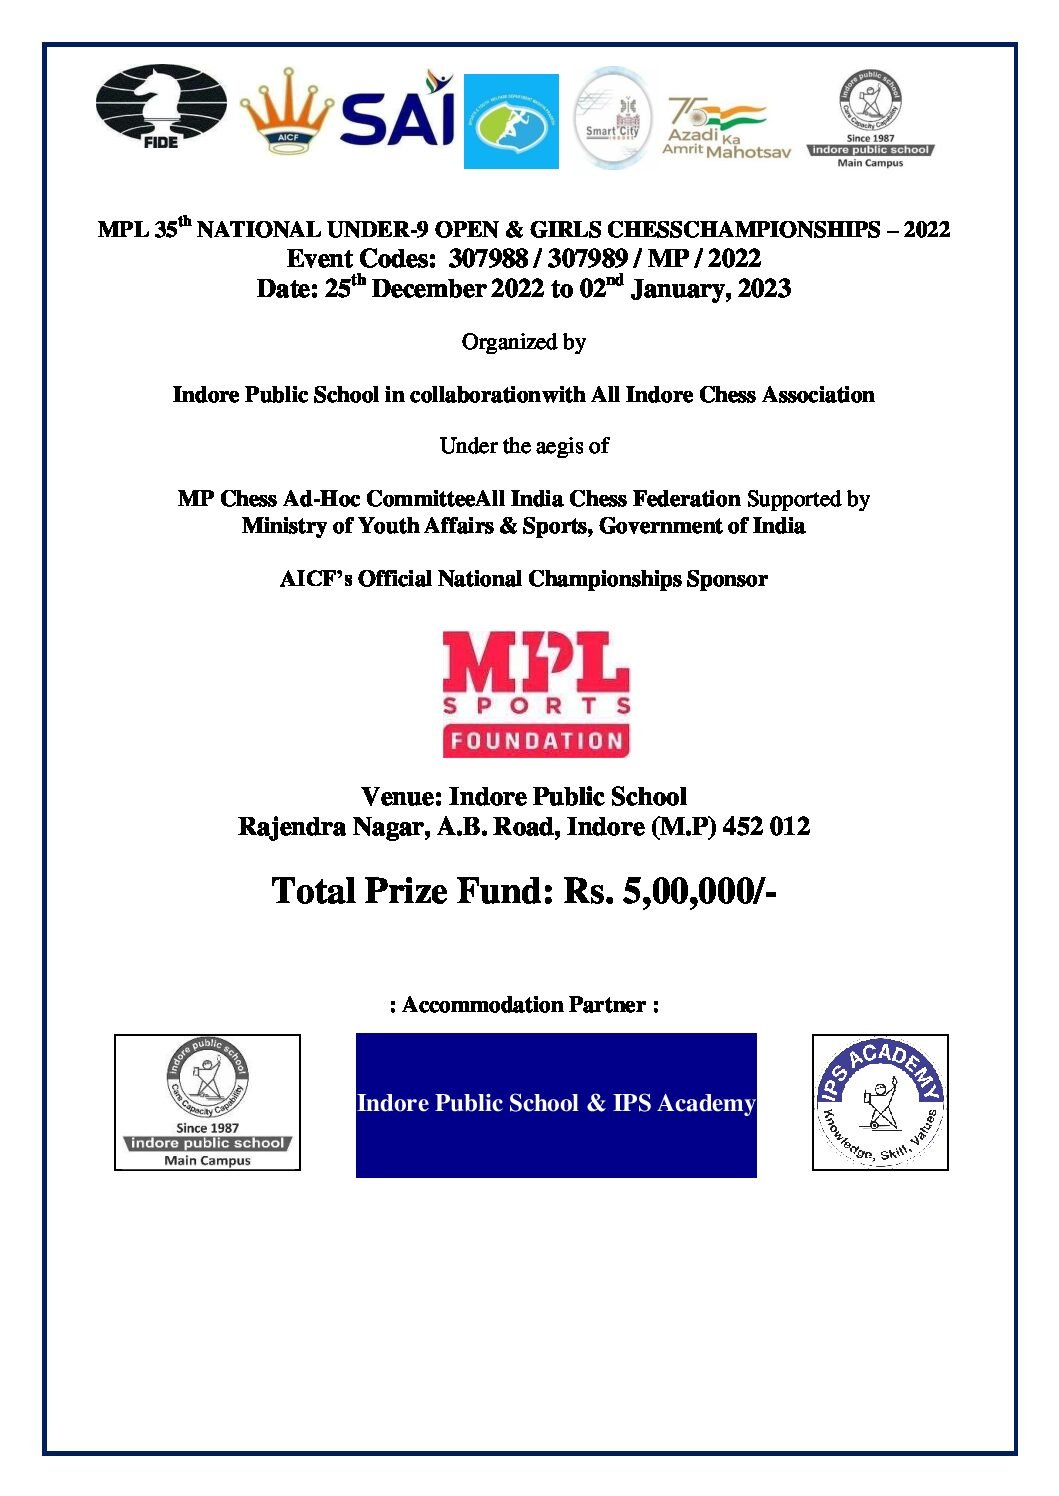 MPL 35th NATIONAL UNDER-9 OPEN & GIRLS CHESSCHAMPIONSHIPS – 2022 Event Codes: 307988 / 307989 / MP / 2022 Date: 25th December 2022 to 02nd January, 2023